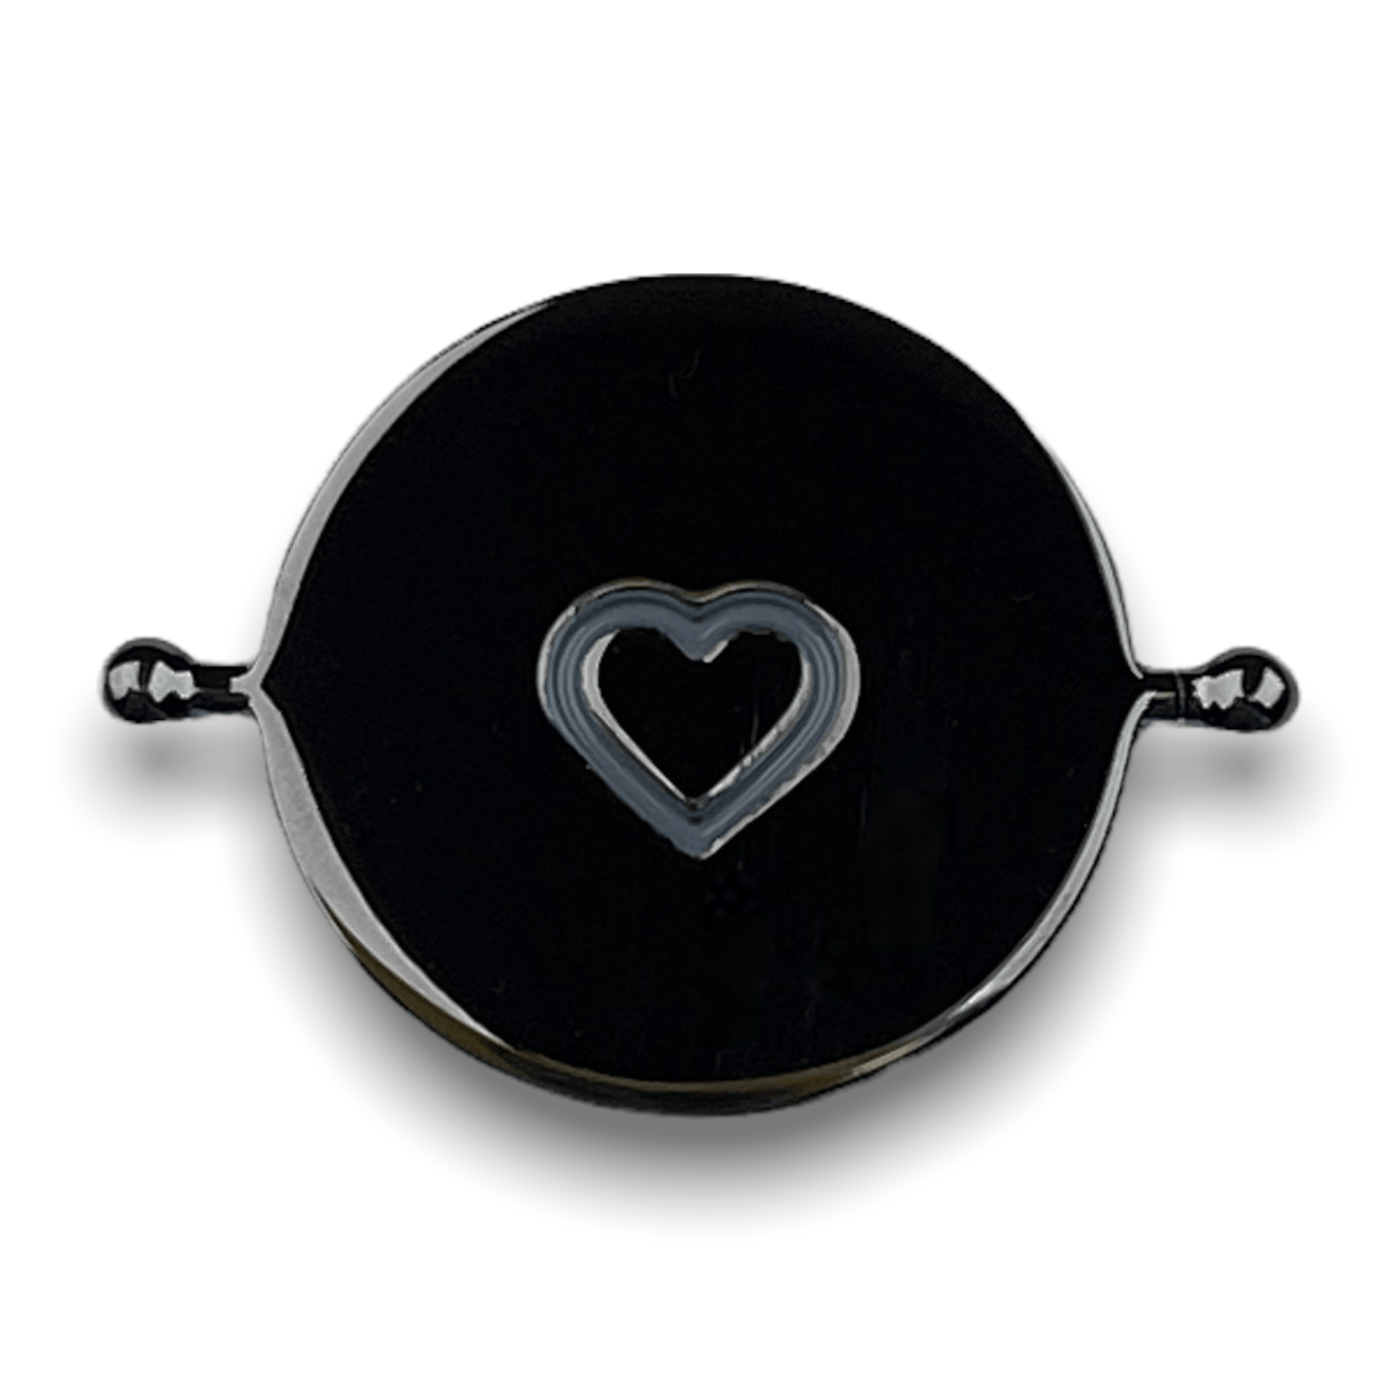 Heart Symbol Element (spin to combine)